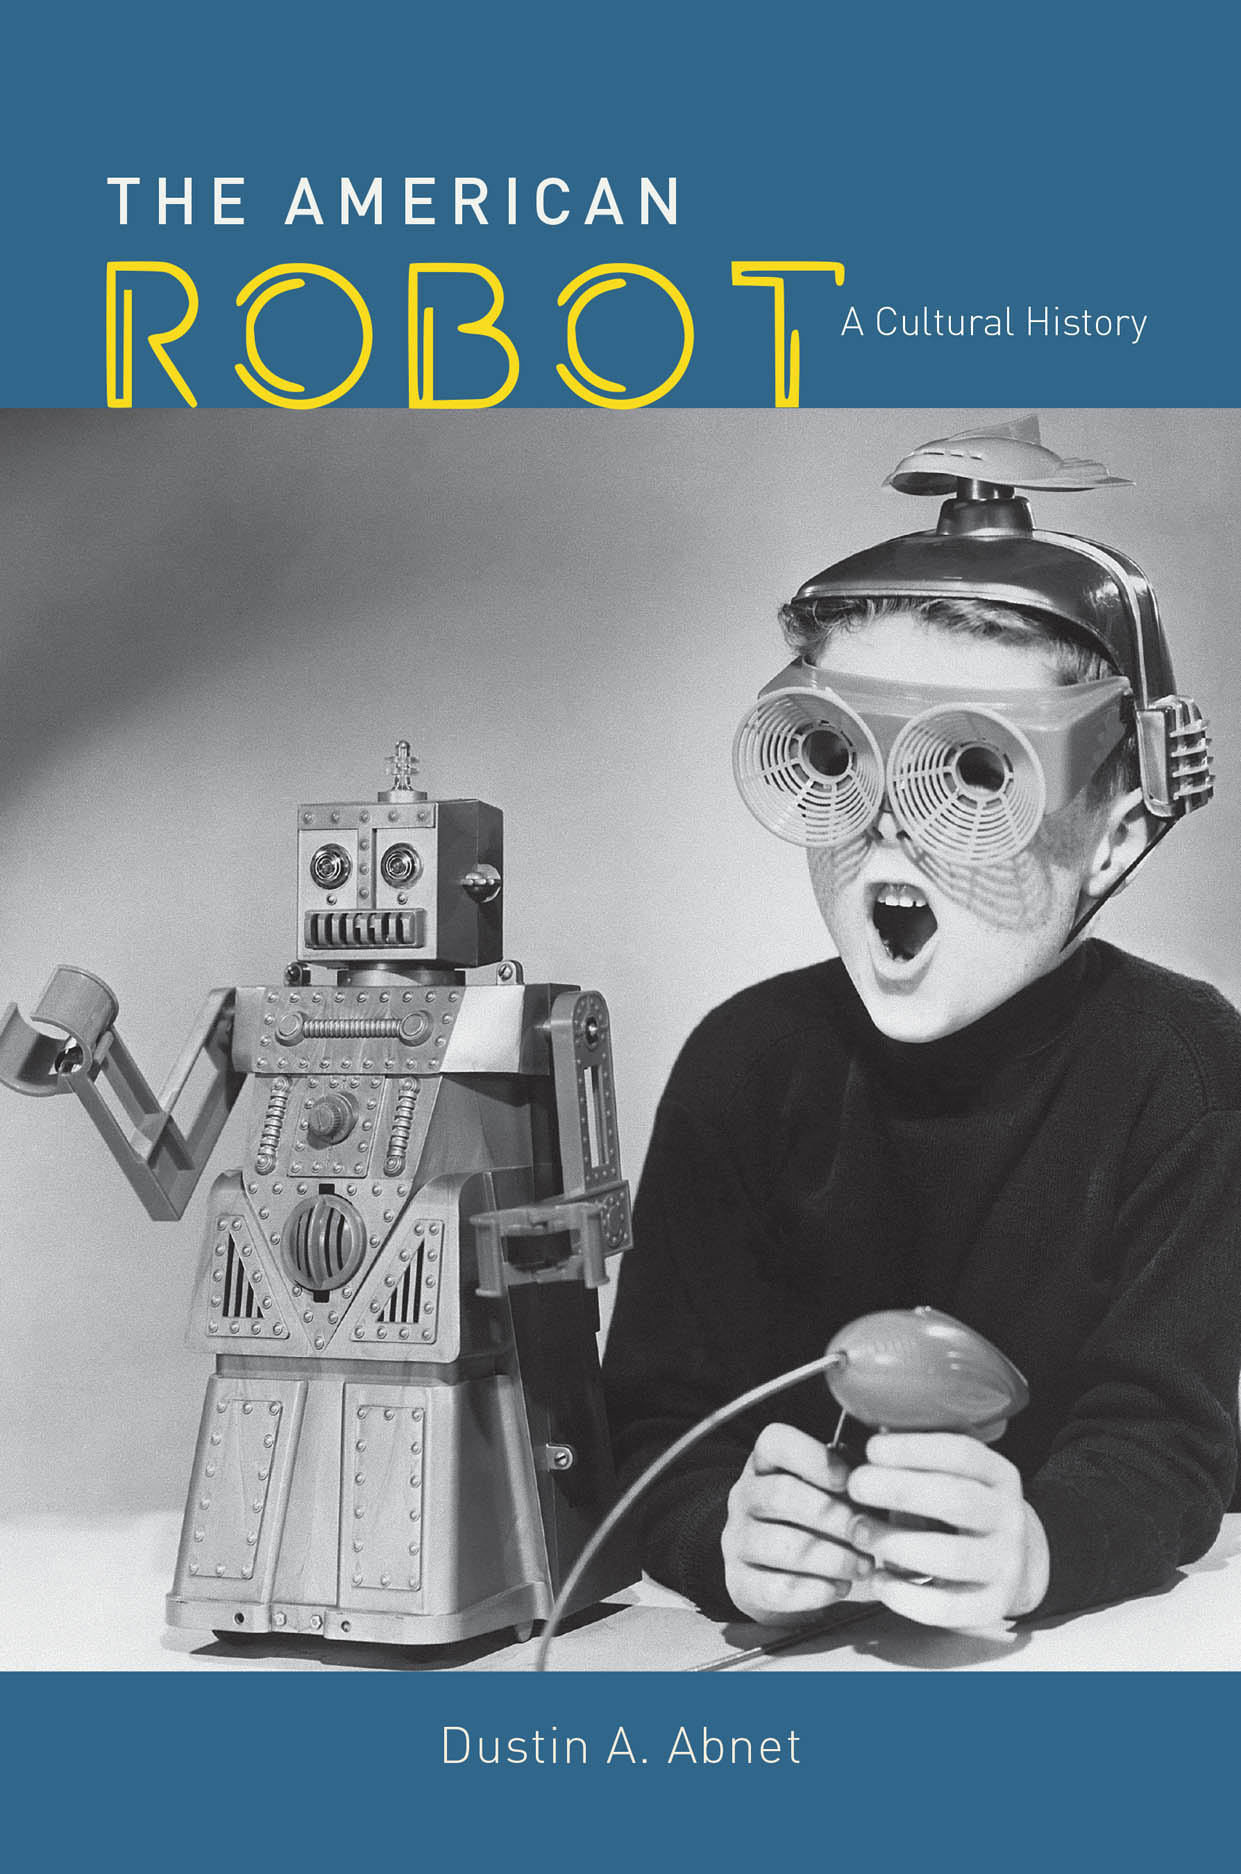 Cover of Abnet, The American Robot (2020)